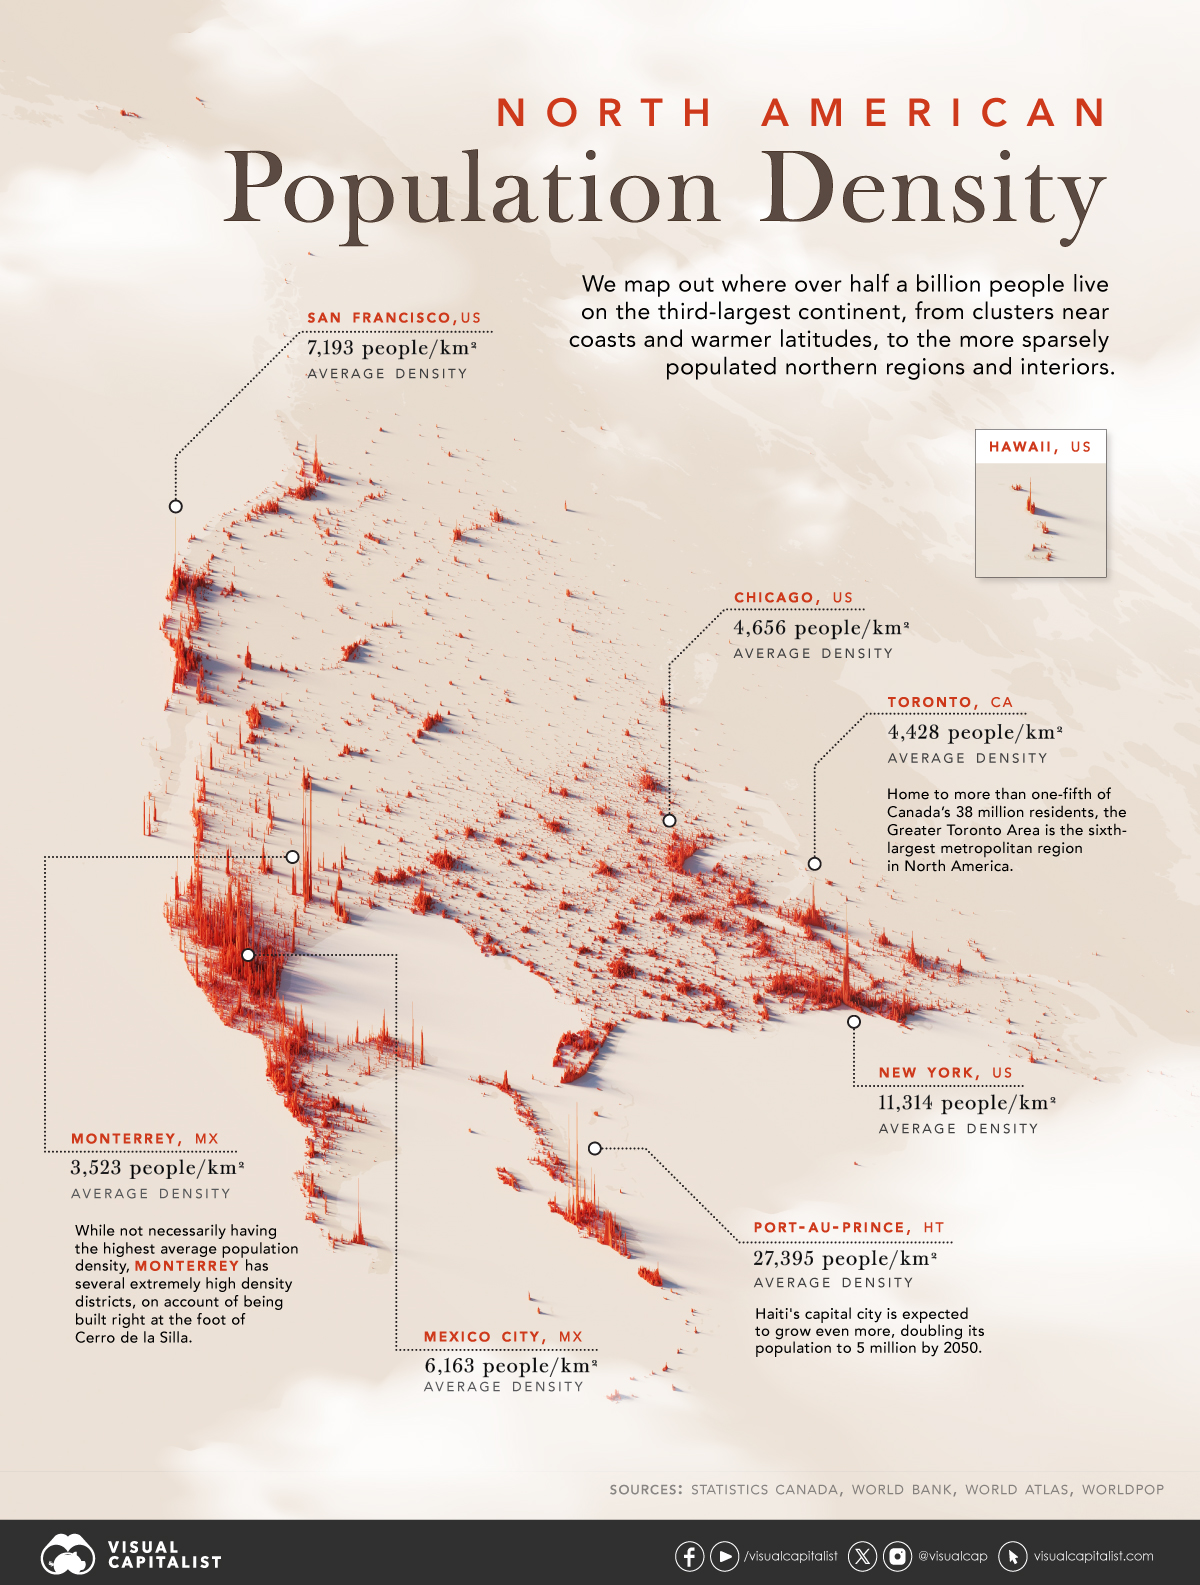 A map of North America population patterns by density.